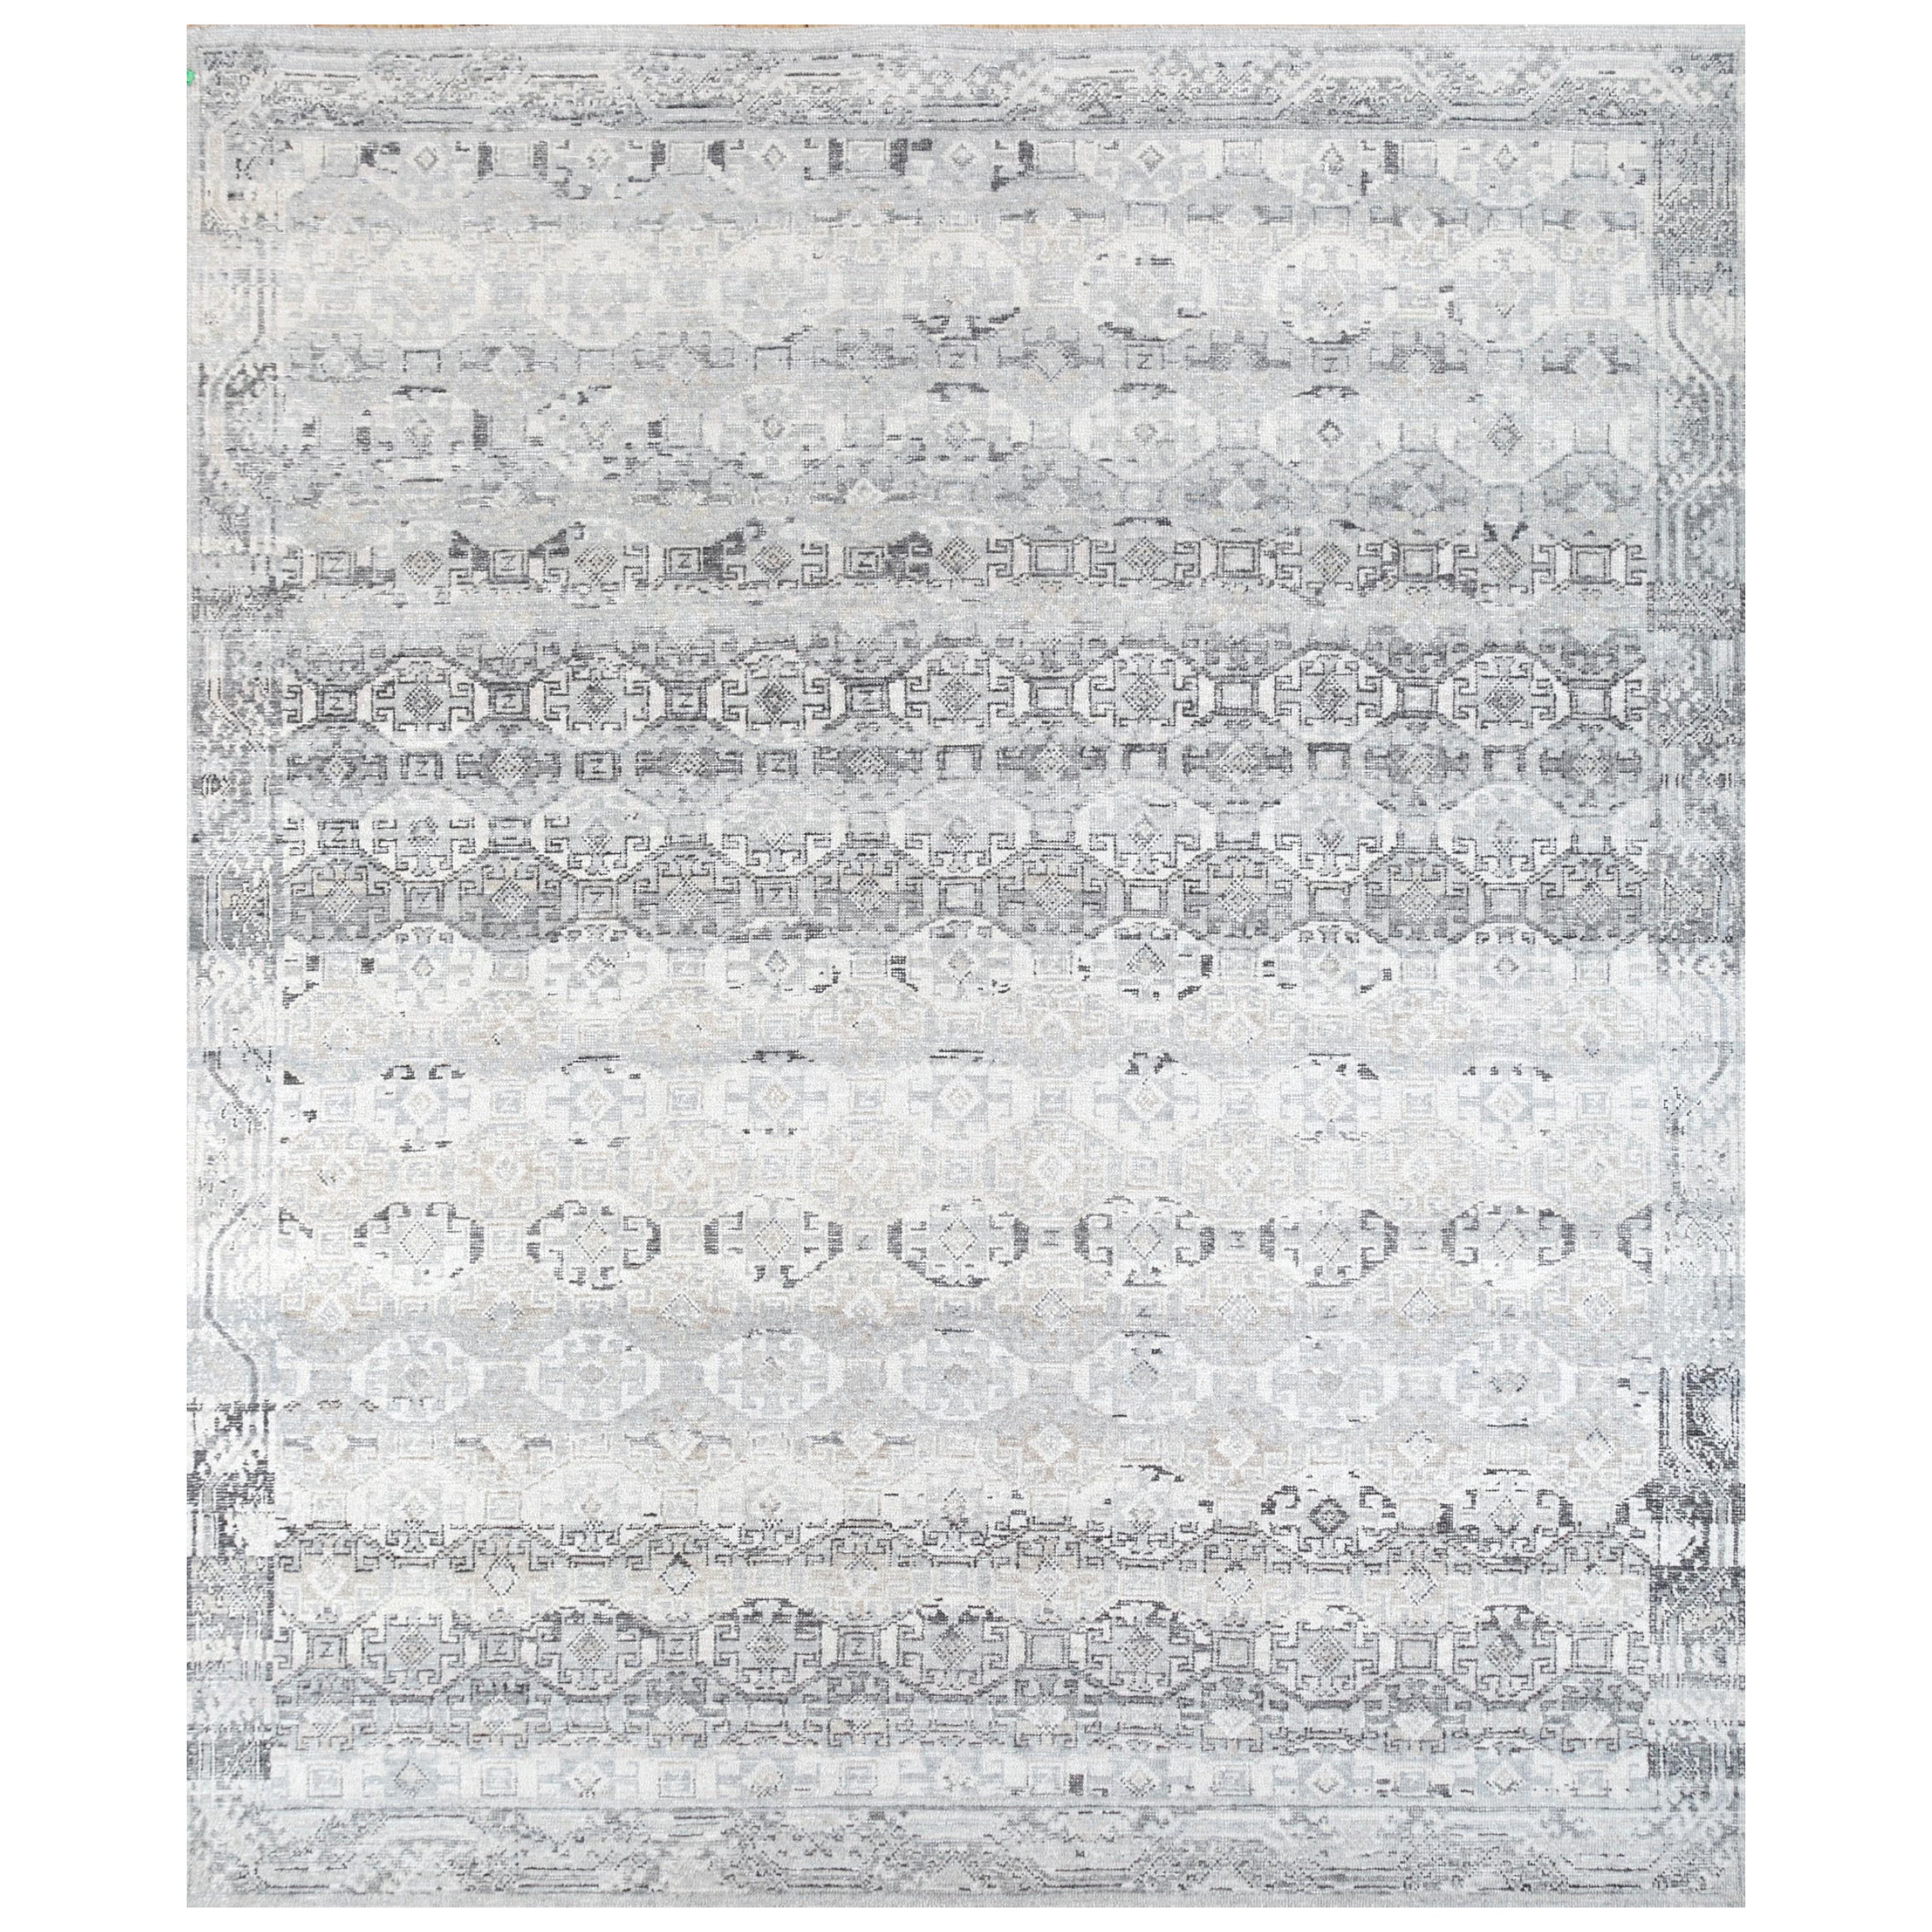 Whispers of Sand Dunes Medium taupe White 180X270 cm Handknotted rug For Sale